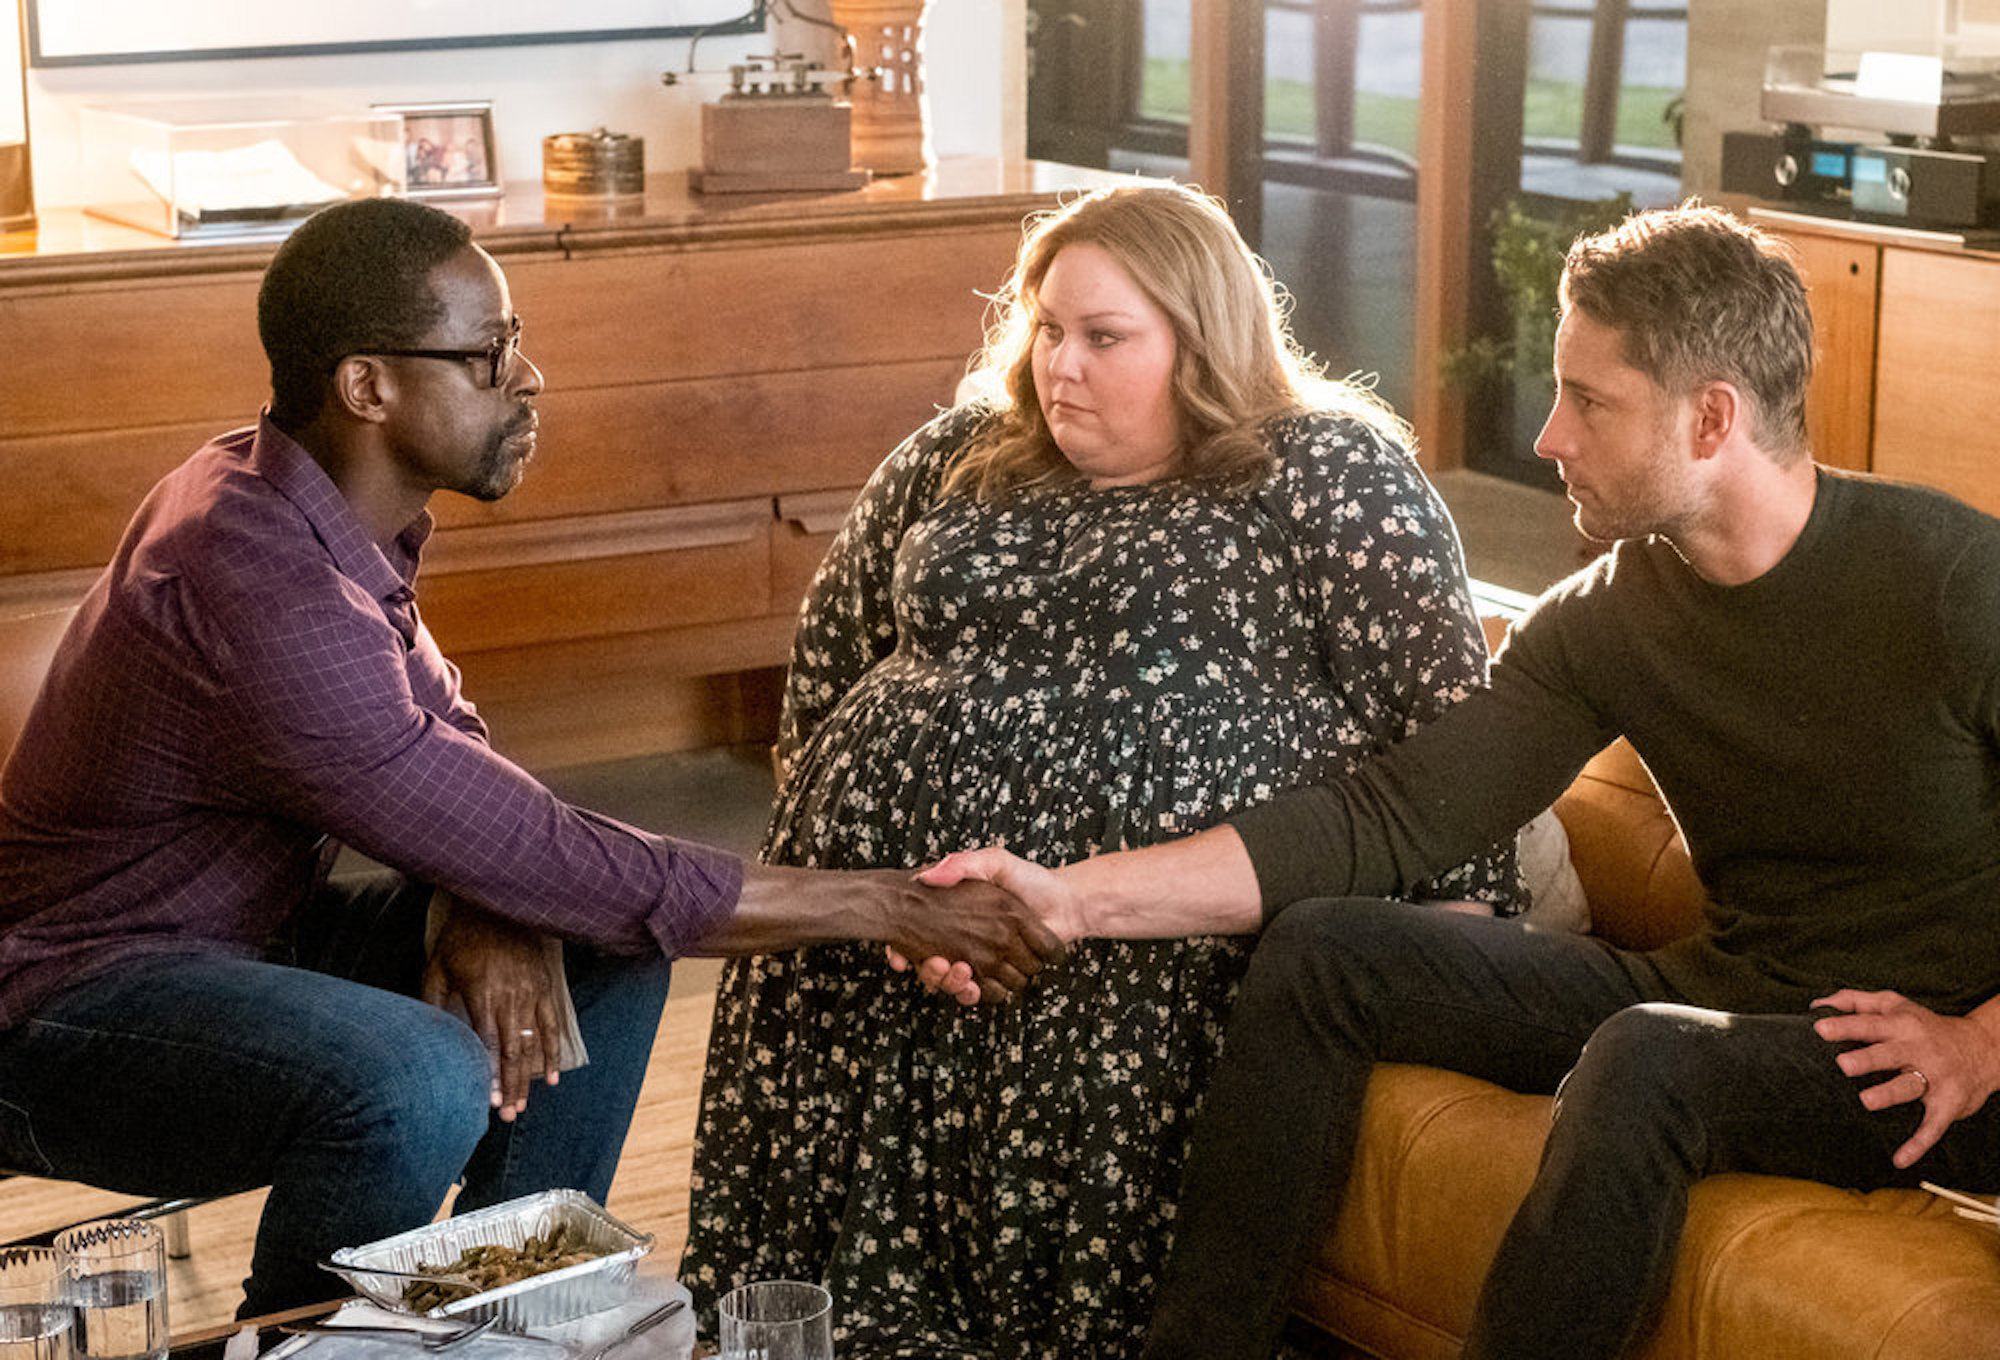 Sterling K. Brown as Randall, Chrissy Metz as Kate, and Justin Hartley as Kevin sitting together in 'This Is Us' Season 6 Episode 16